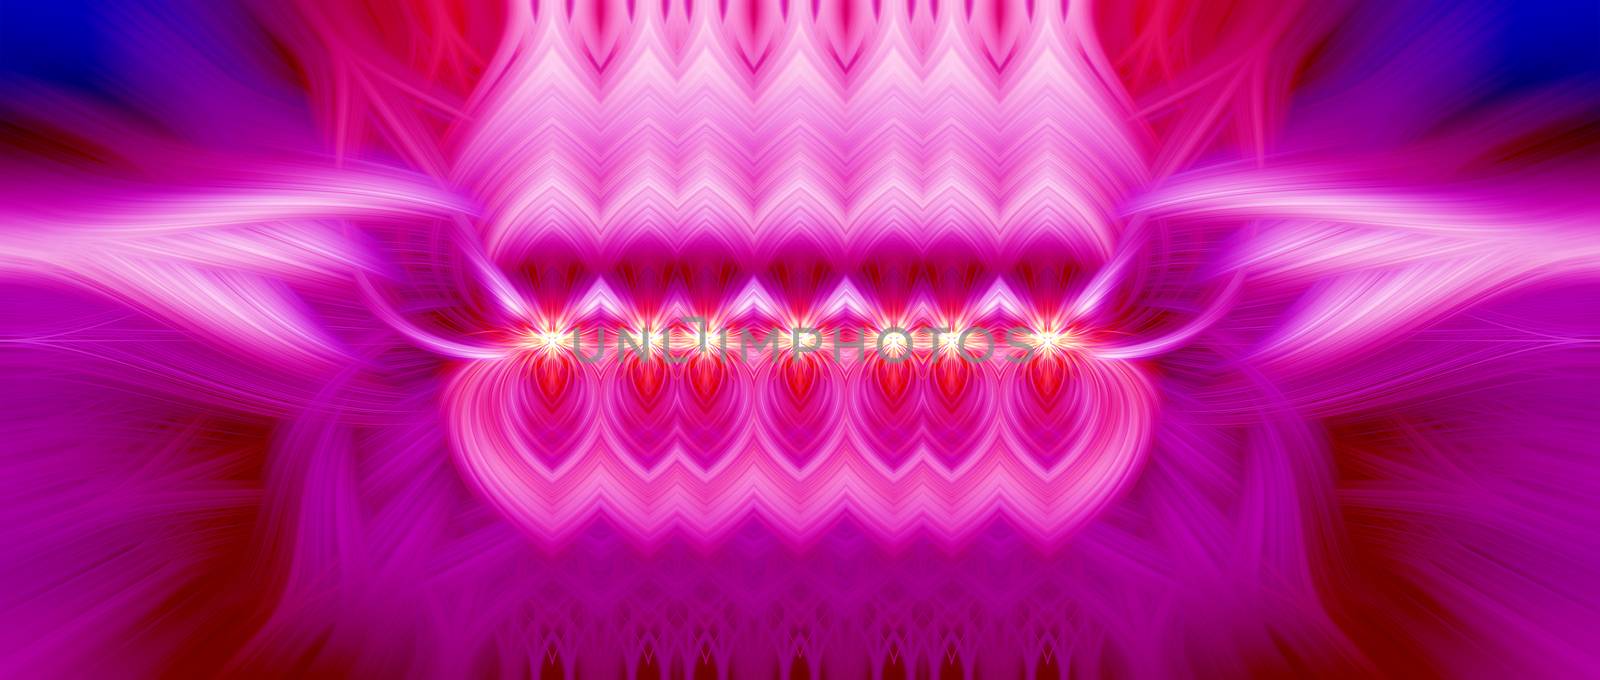 Beautiful abstract intertwined 3d fibers forming a shape of sparkle, flame, flower, interlinked hearts. Pink, purple, maroon, red, and blue colors. Illustration. Banner and panorama size. by DamantisZ